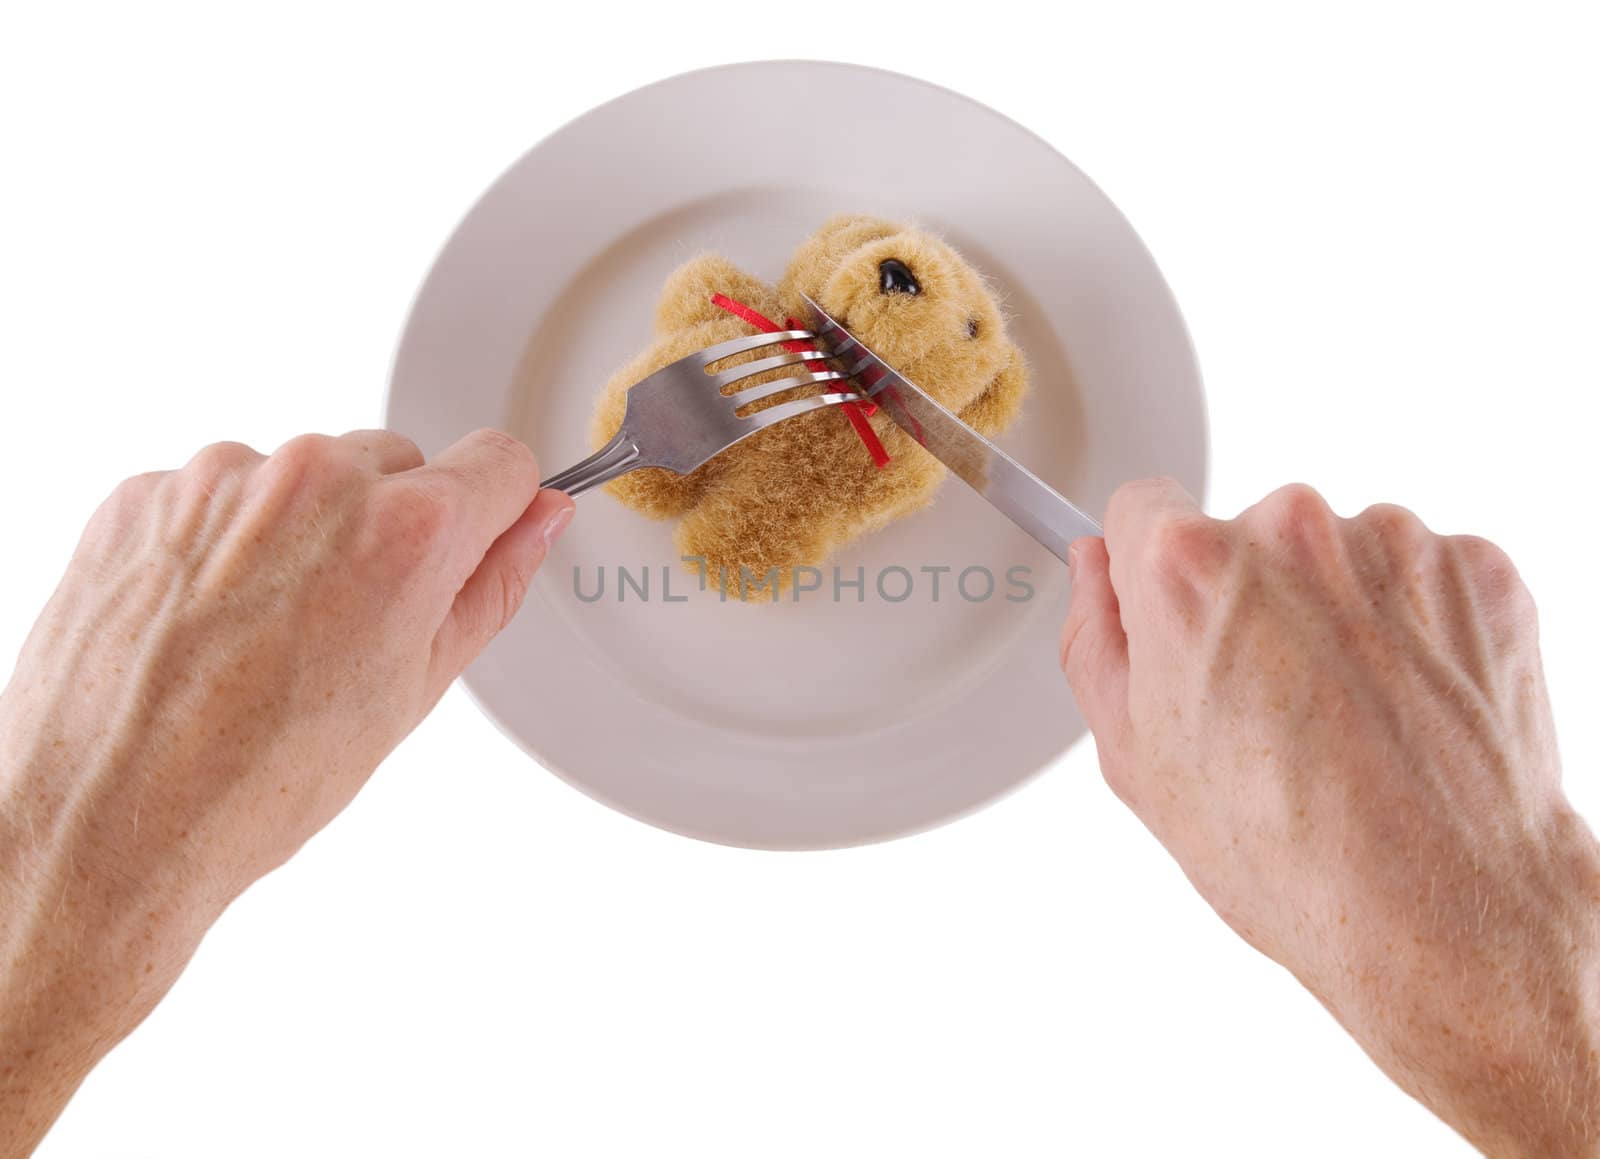 Eating of a toy bear cub on a plate